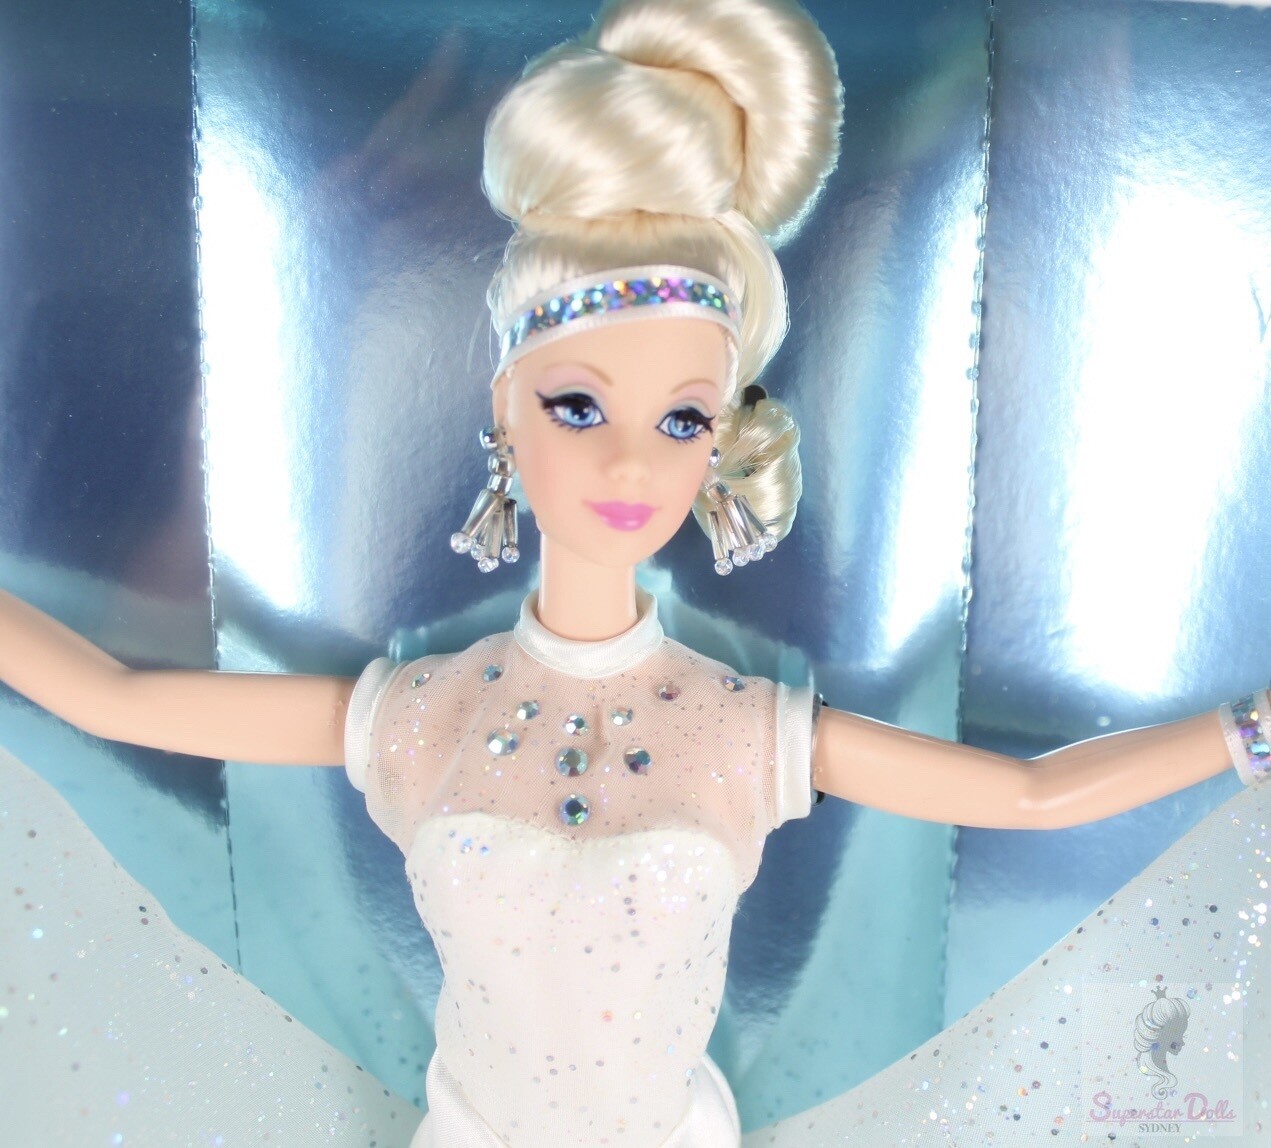 1996 Collector Edition: Starlight Dance Barbie Doll